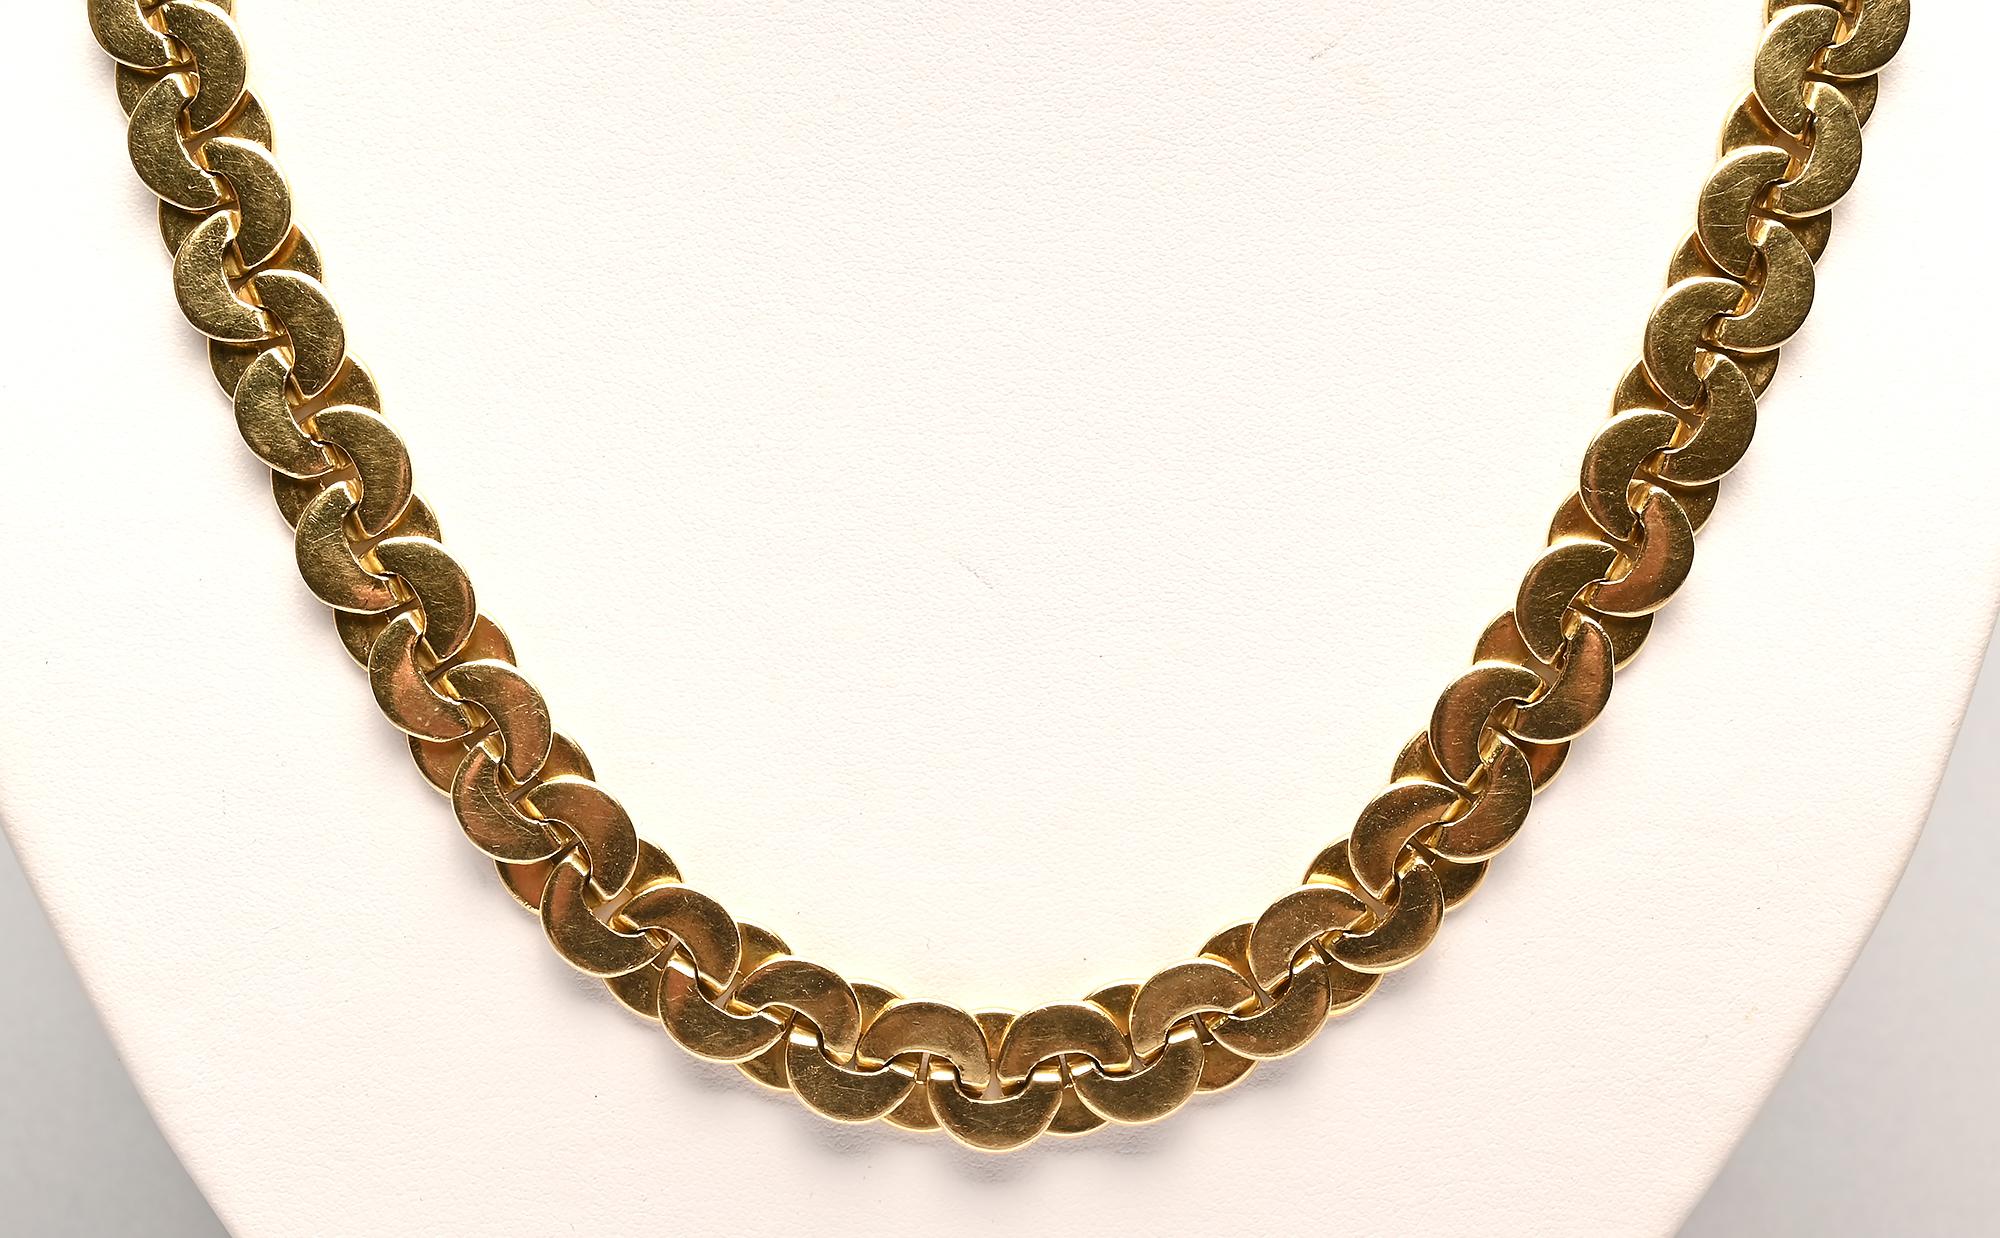 Long 18 karat gold chain necklace by Buccellati with a different finish on either side. One side is gloss and the other has a lightly textured finish made of extremely fine straight lines. The overlapping circles are closely connected to create a